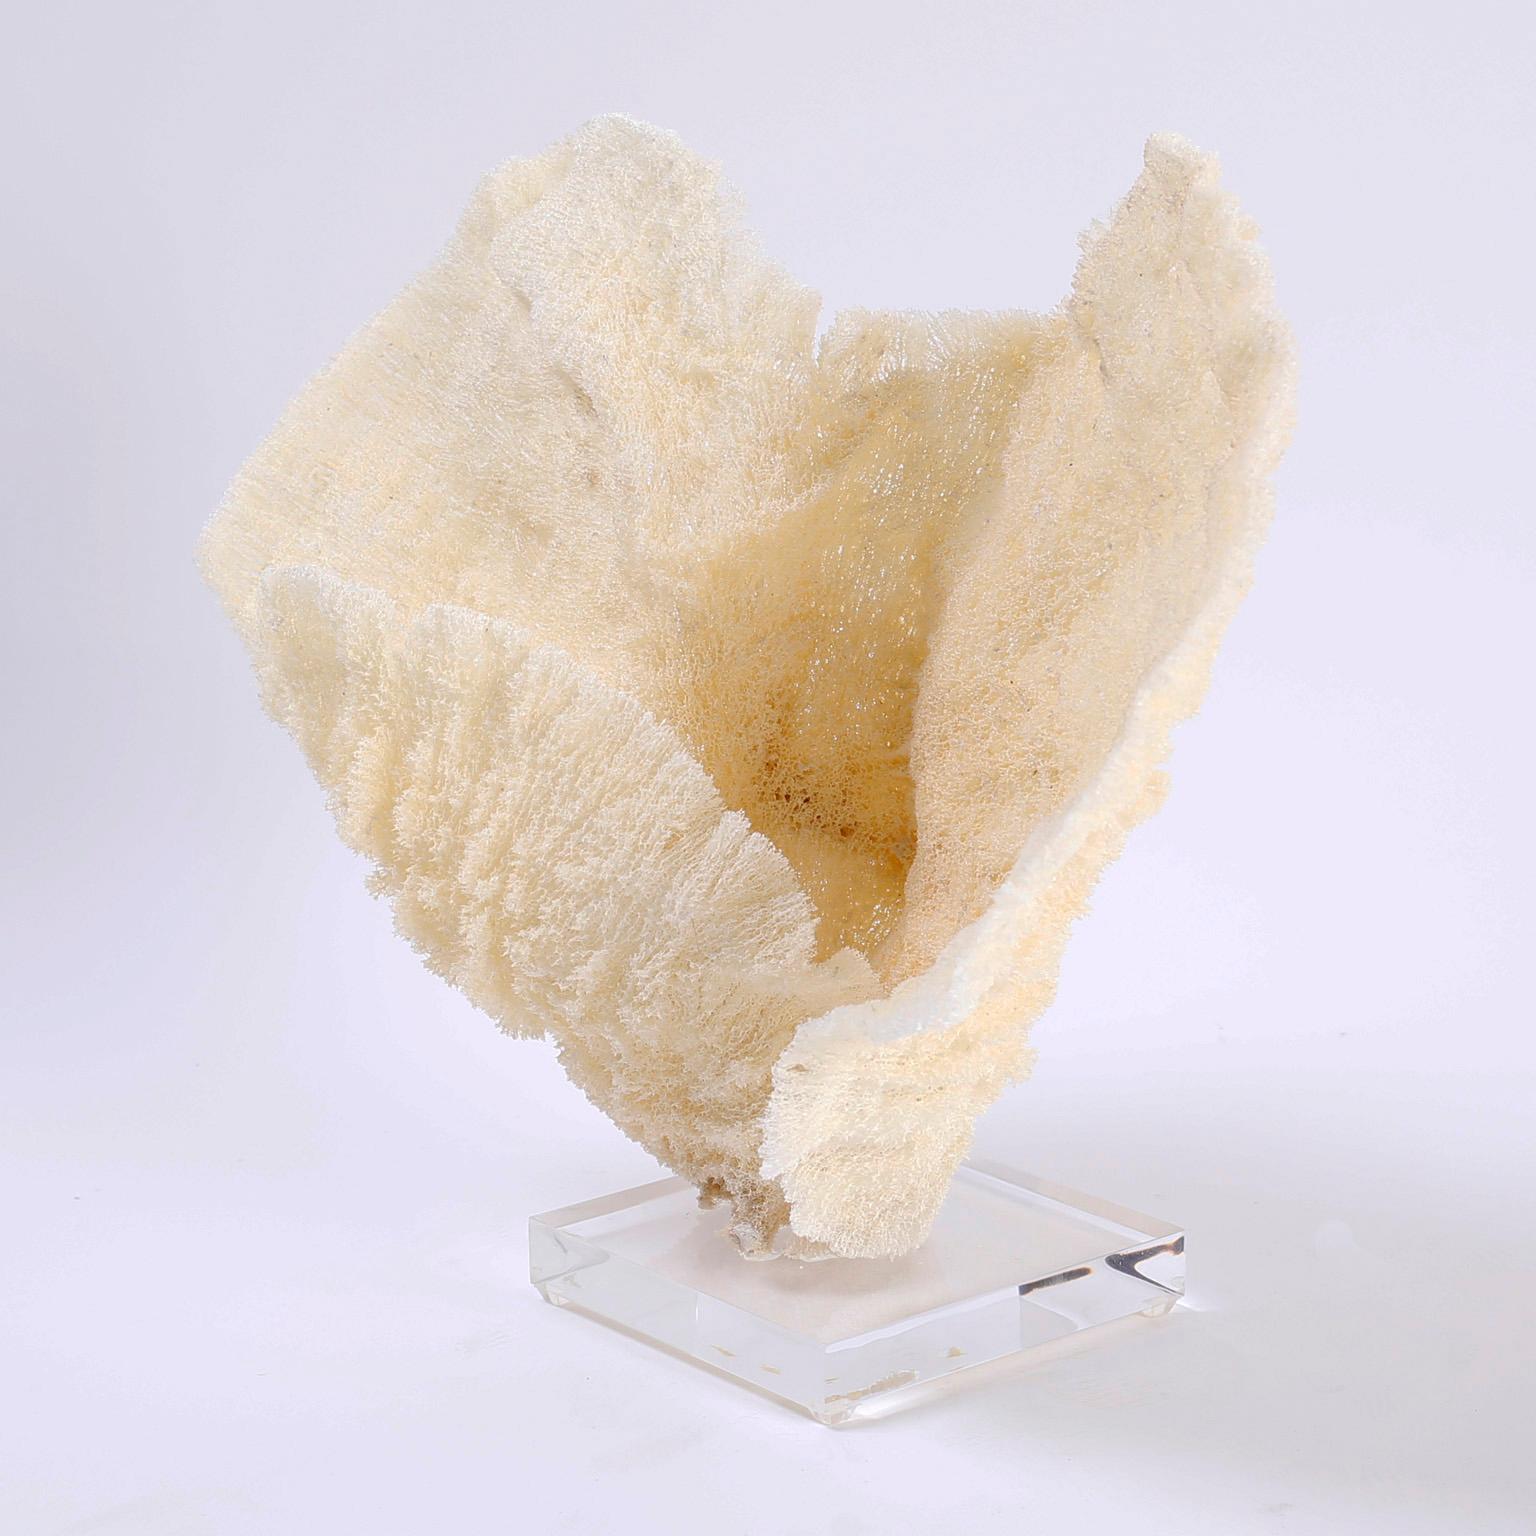 Two Sea Sponge Specimens on Lucite, Priced Individually 1